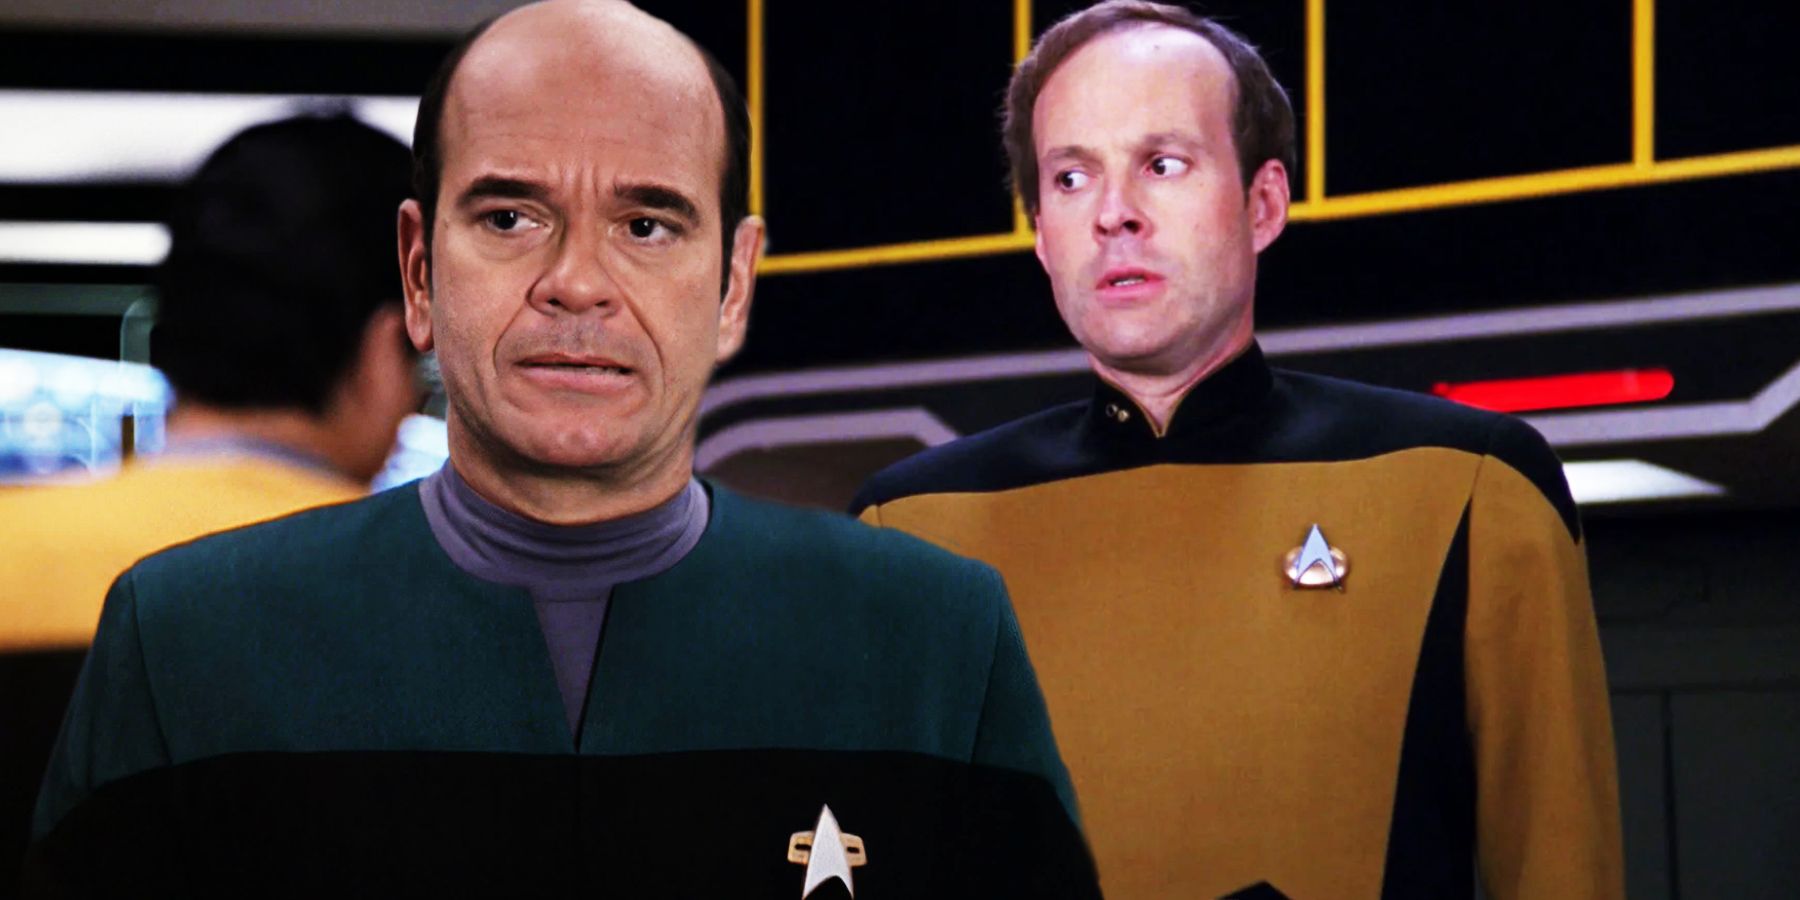 Robert Picardo as The Doctor and Dwight Schultz as Reg Barclay in Star Trek